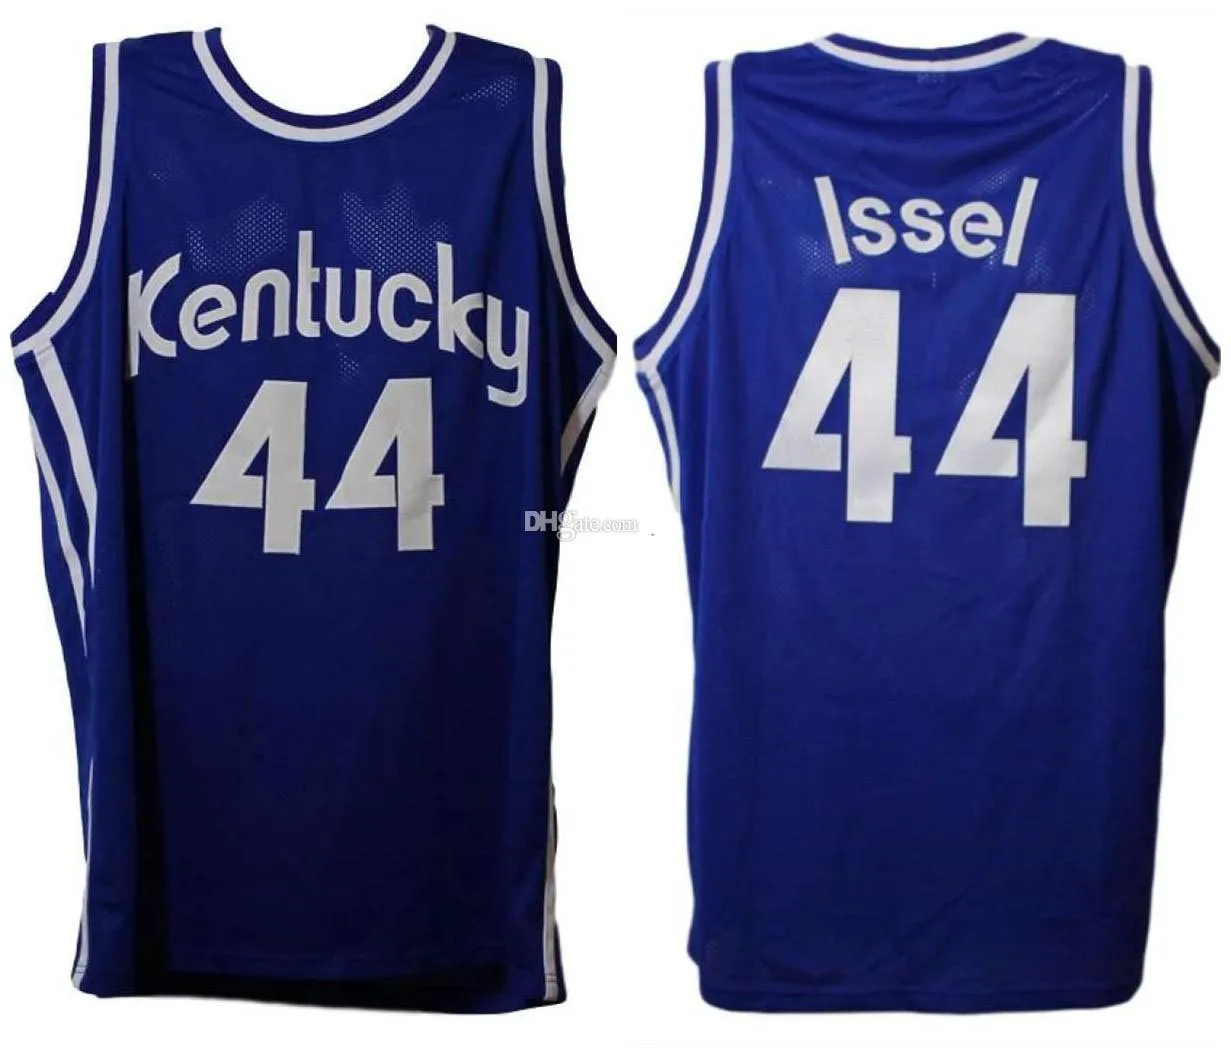 Dan Issel #44 Kentucky Colonels Retro Basketball Jersey The Hourse Mens ed Custom Number Name Jerseys